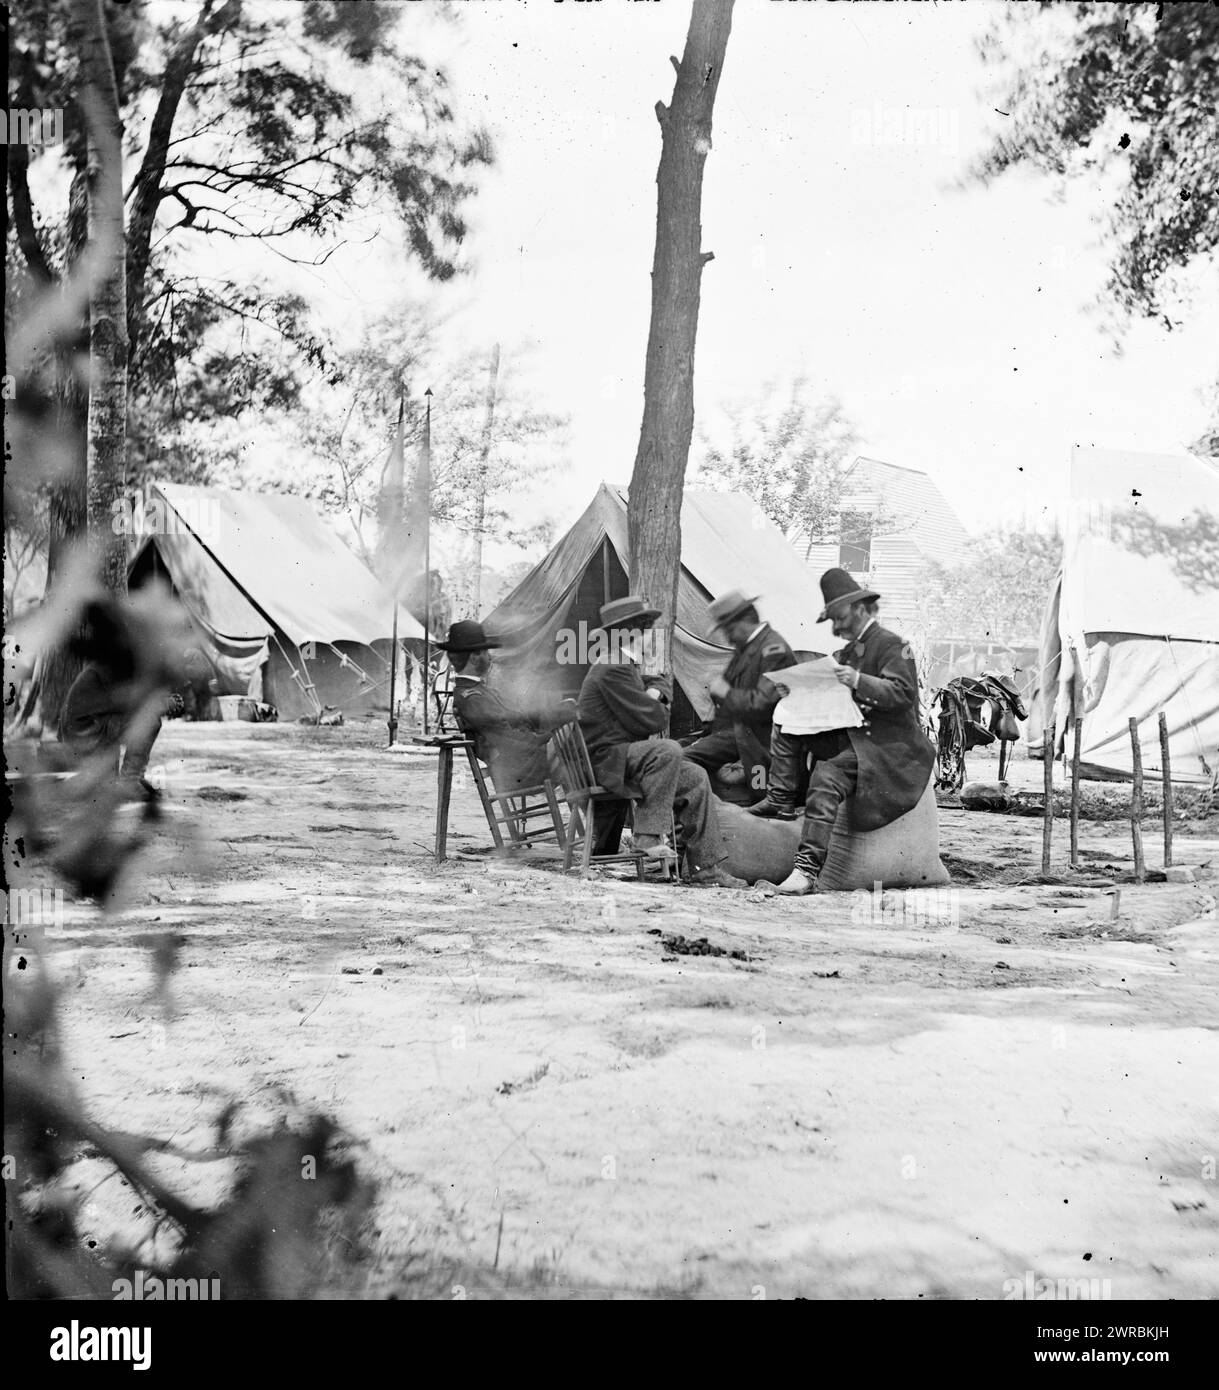 Gen. Ambrose E. Burnside (reading newspaper) with Mathew B. Brady (nearest tree) at Army of the Potomac headquarters, Photograph from the main eastern theater of the war, Burnside and Hooker, November 1862-April 1863., 1864 June 11 or 12, United States, History, Civil War, 1861-1865, Stereographs, 1860-1870., Stereographs, 1860-1870, Wet collodion negatives, 1 negative (2 plates): glass, stereograph, wet collodion Stock Photo